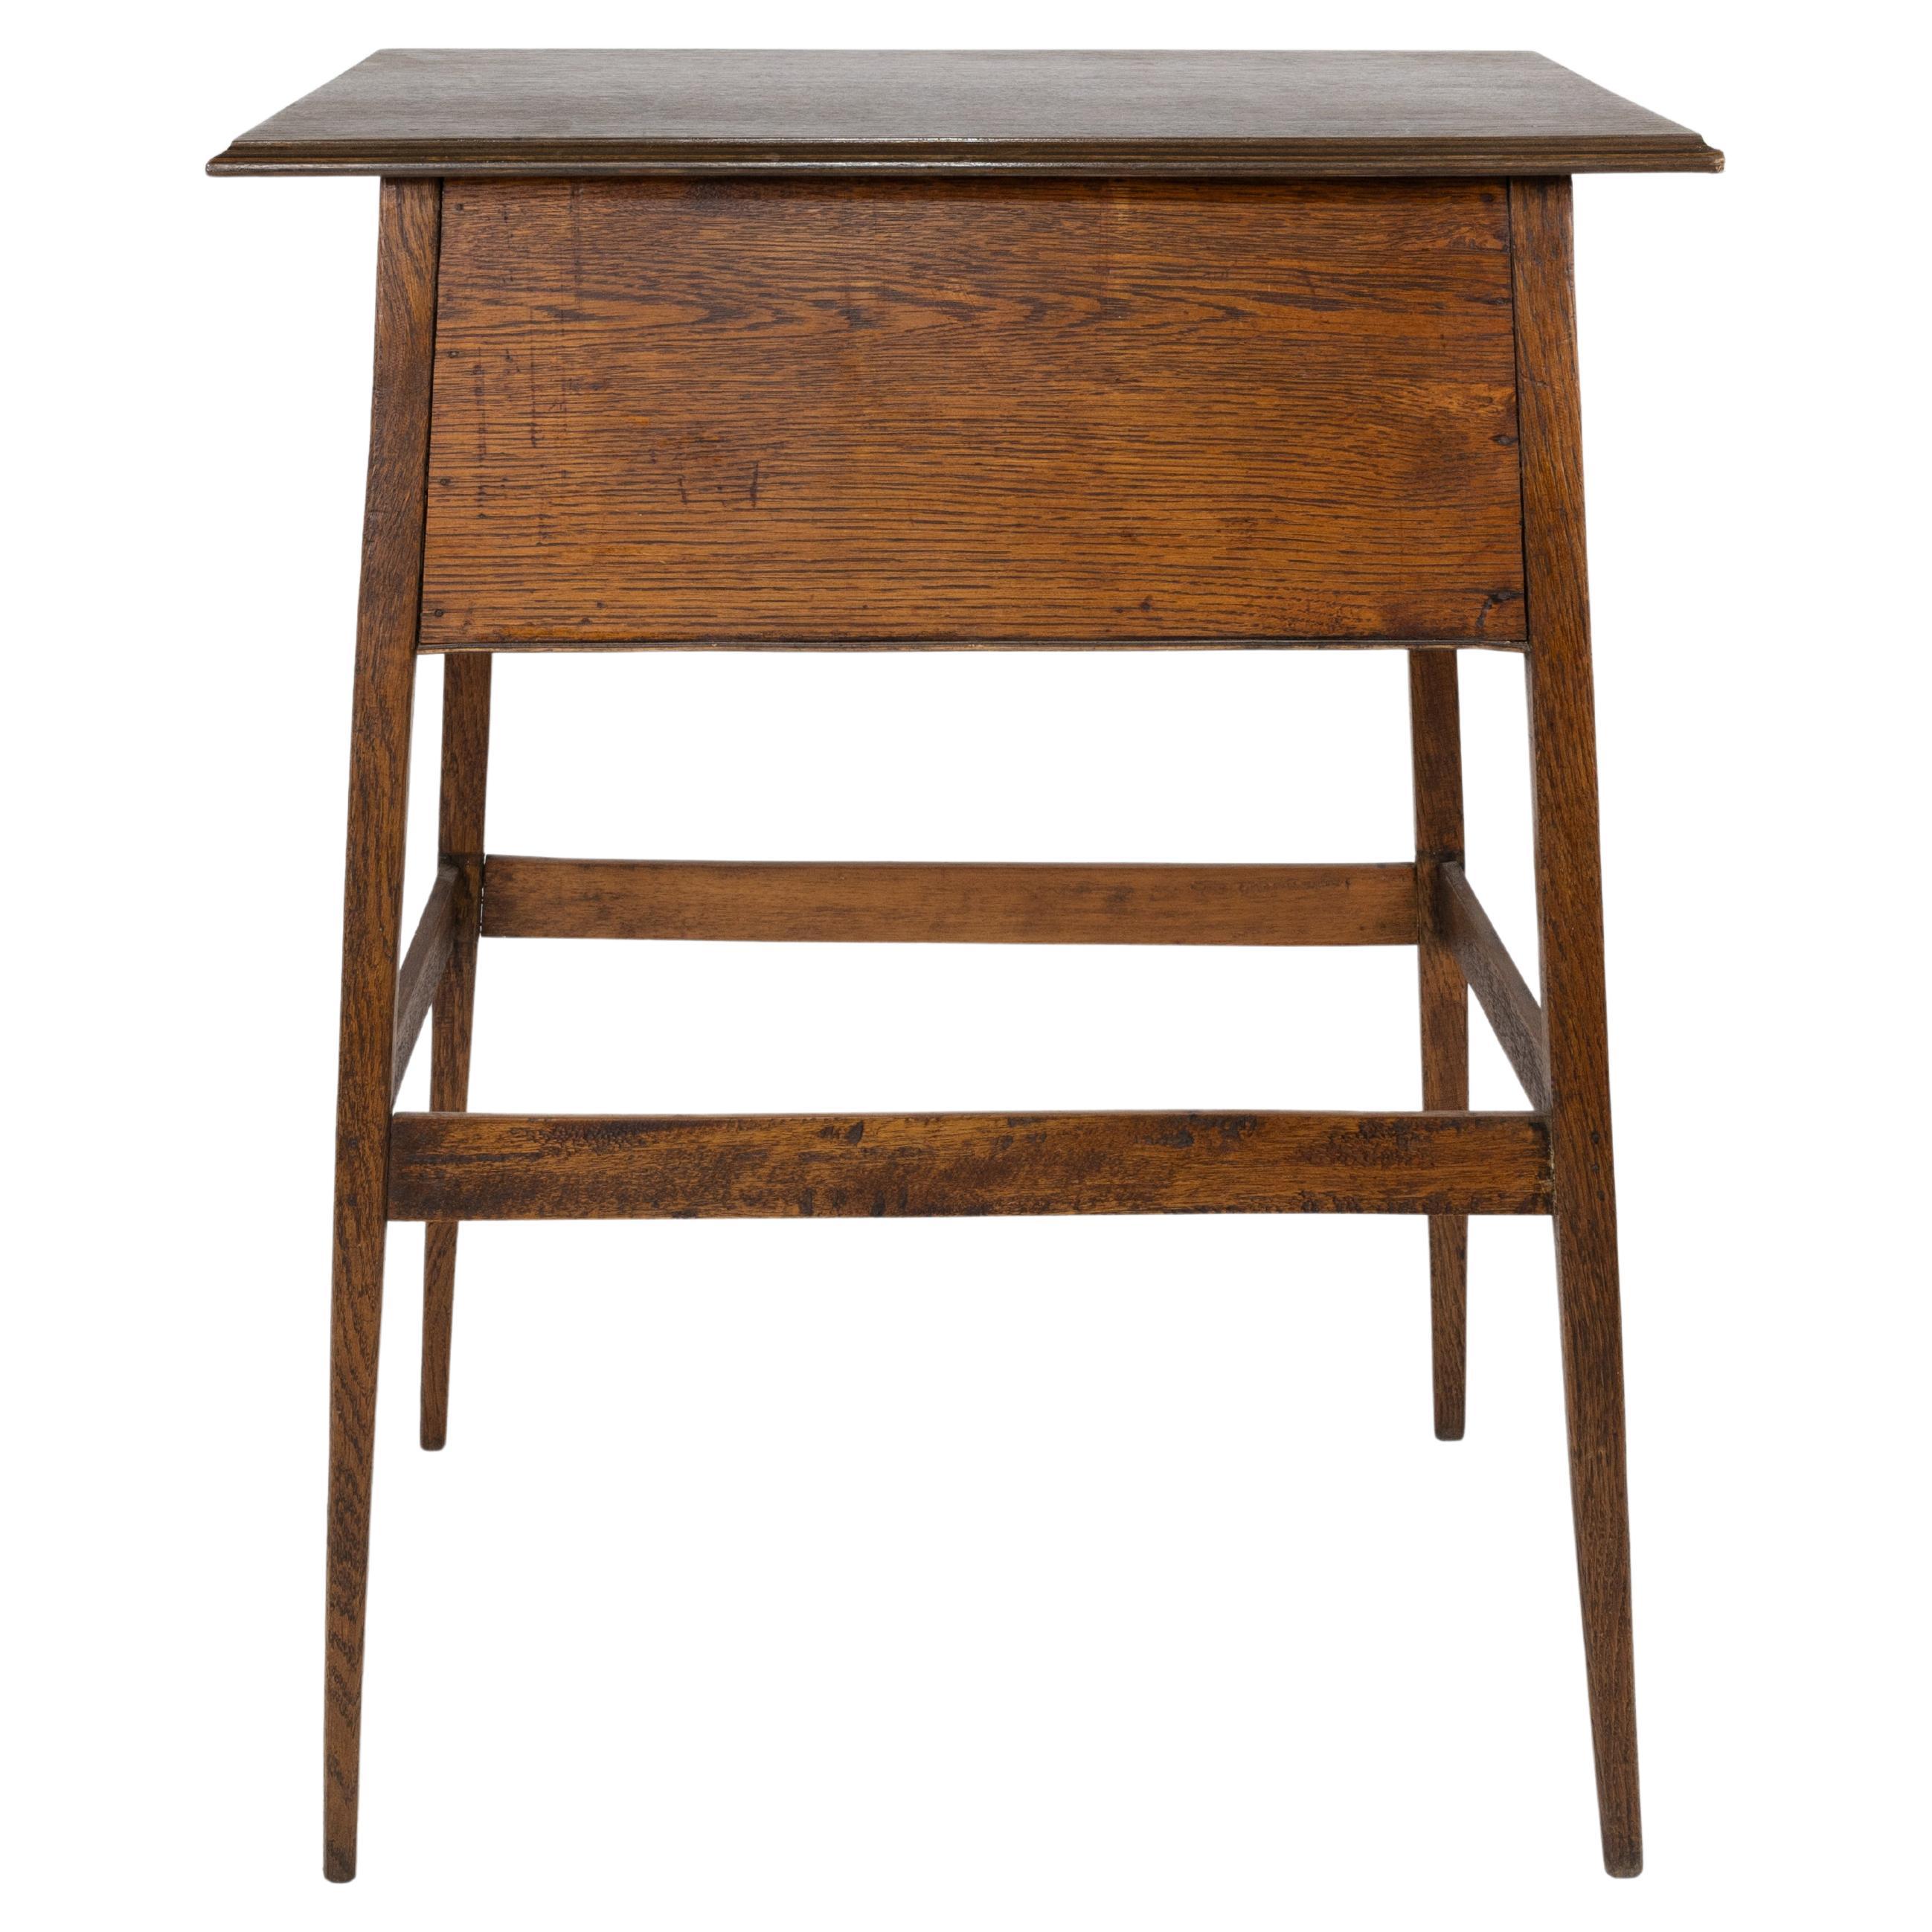 A simple Arts and Crafts oak oblong side or bedside table with a moulded edge to the top and a usful storage cuboard below on slender tapering legs united by lower stretchers.
